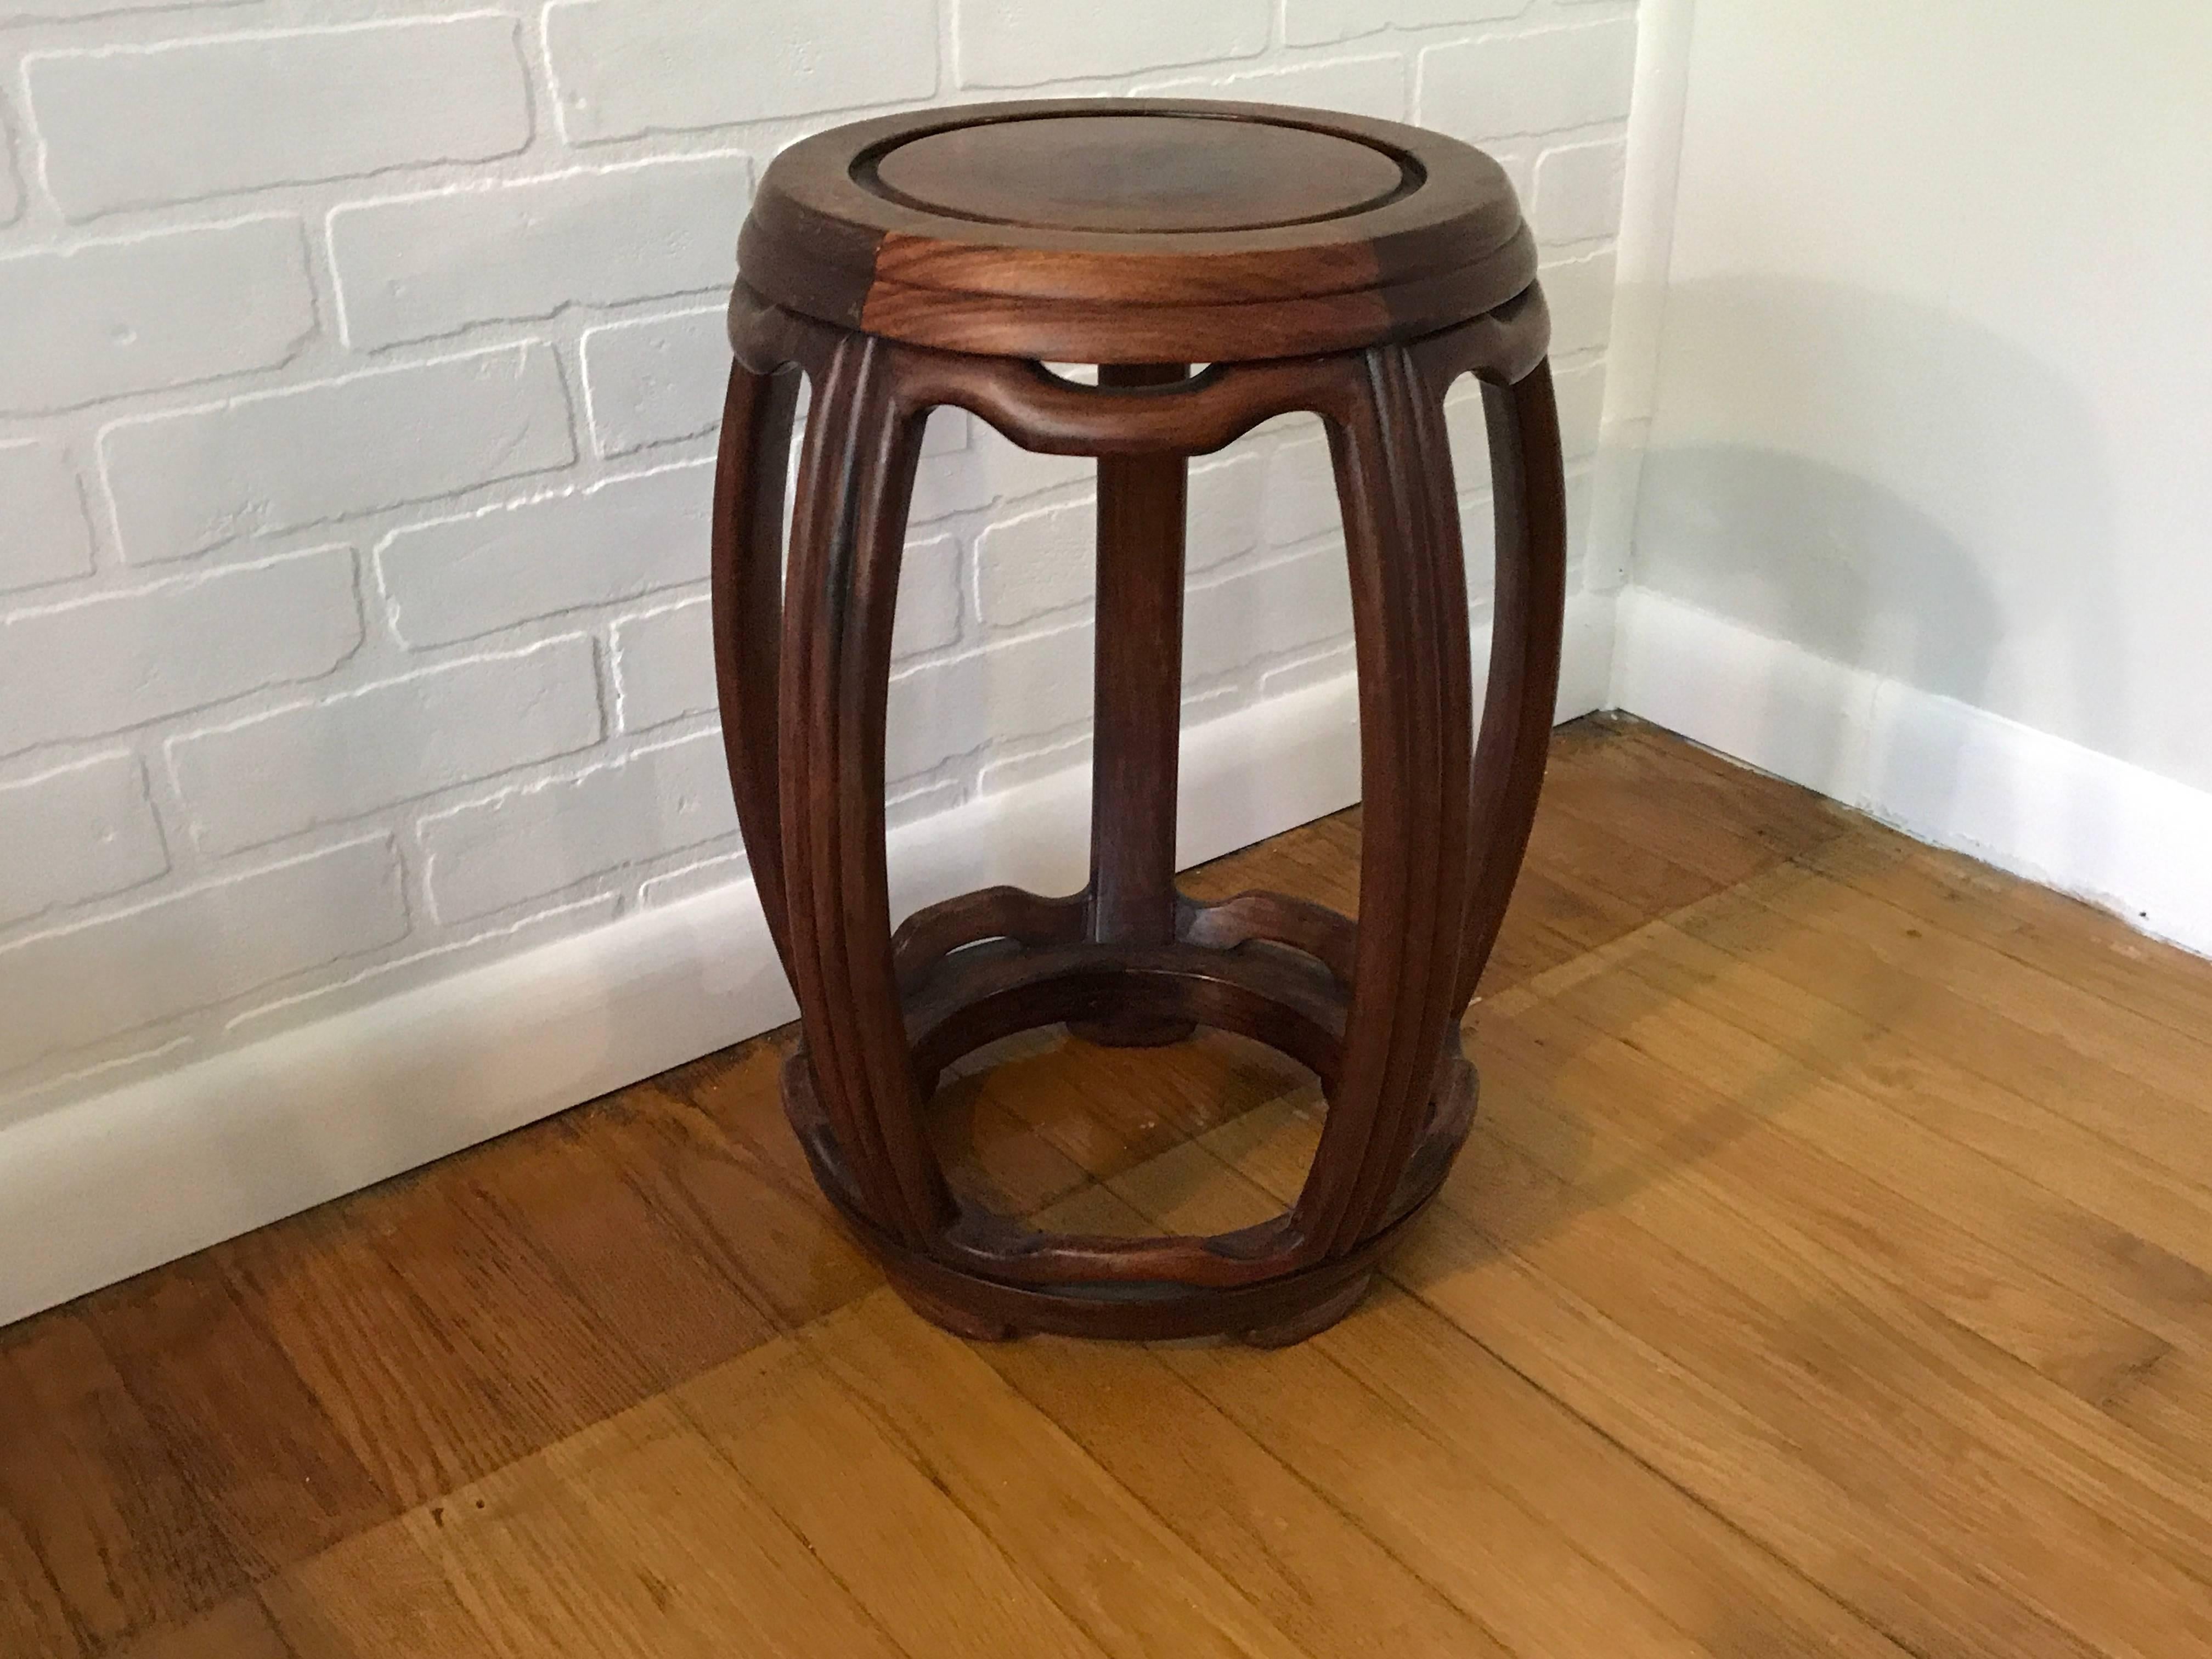 Offered is a fabulous, 1950s Ming-style wooden garden stool. Extremely sturdy. 11